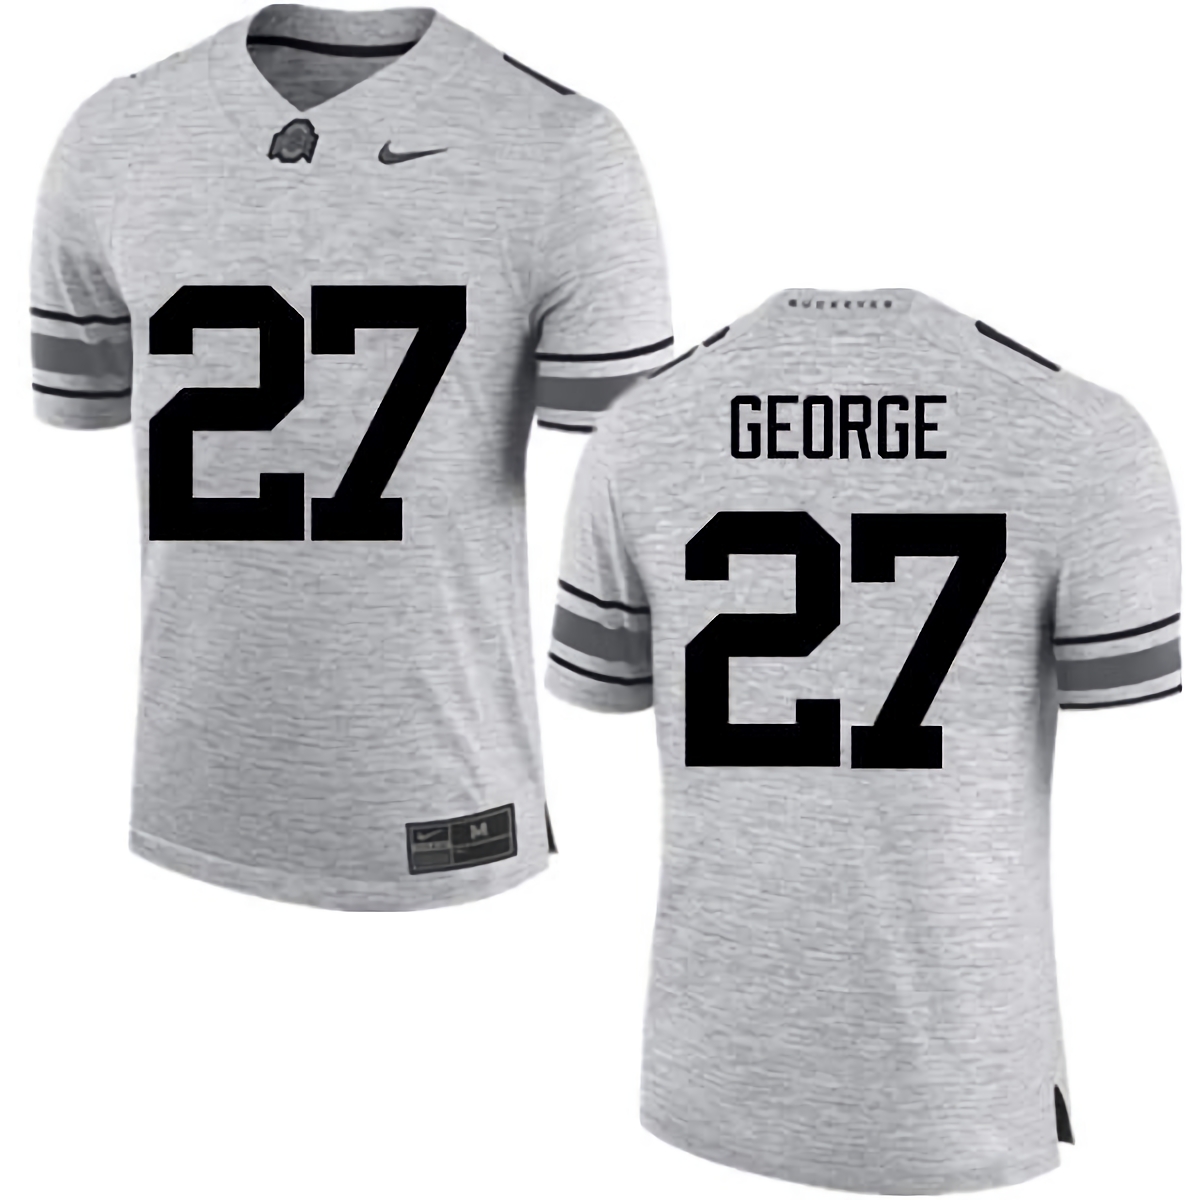 Eddie George Ohio State Buckeyes Men's NCAA #27 Nike Gray College Stitched Football Jersey RPW3656NG